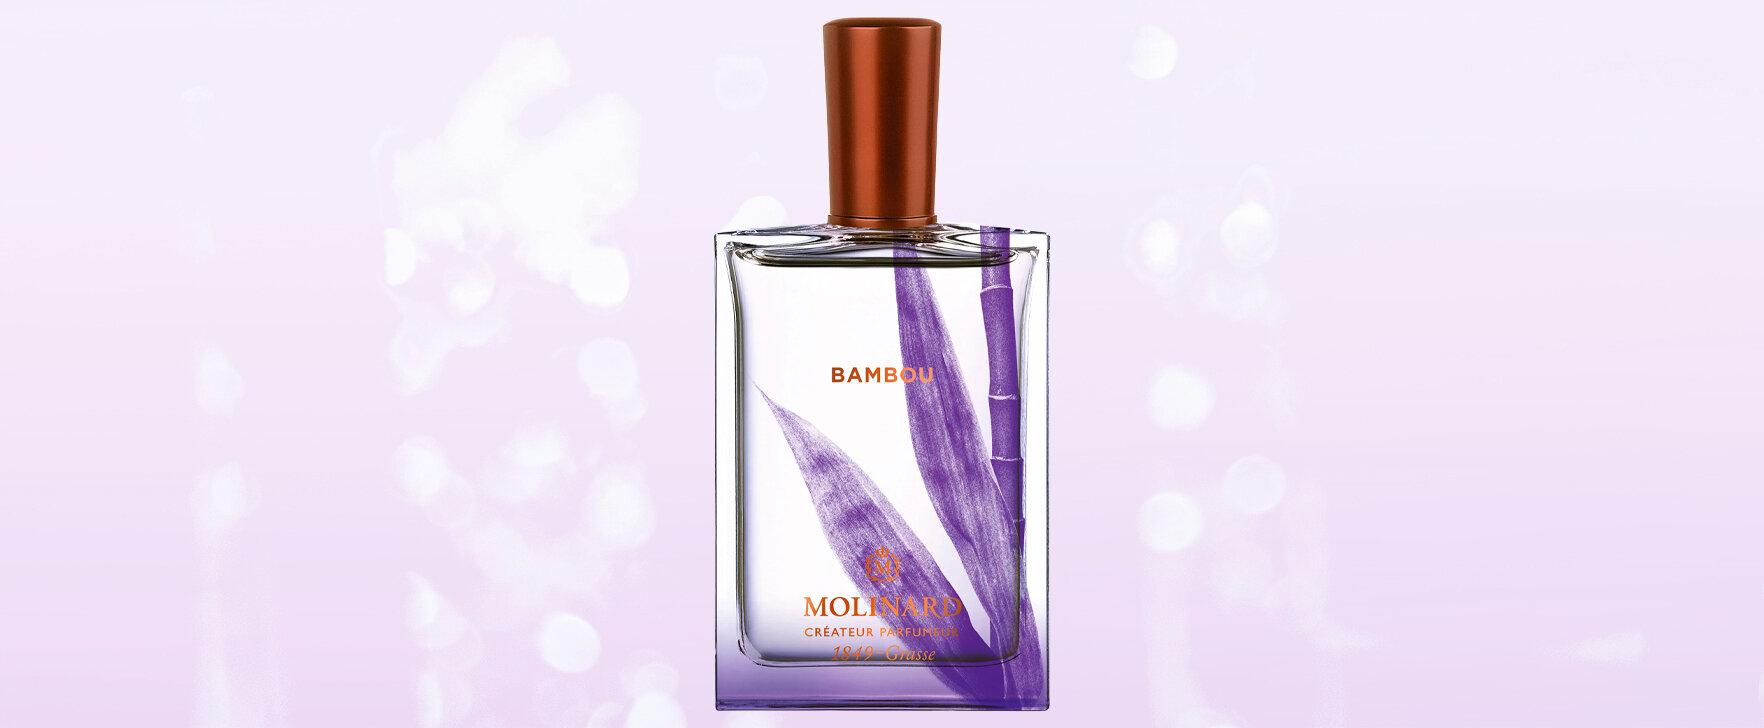 Inspired by the Bamboo Forests: The New Unisex Fragrance "Bambou" by Molinard